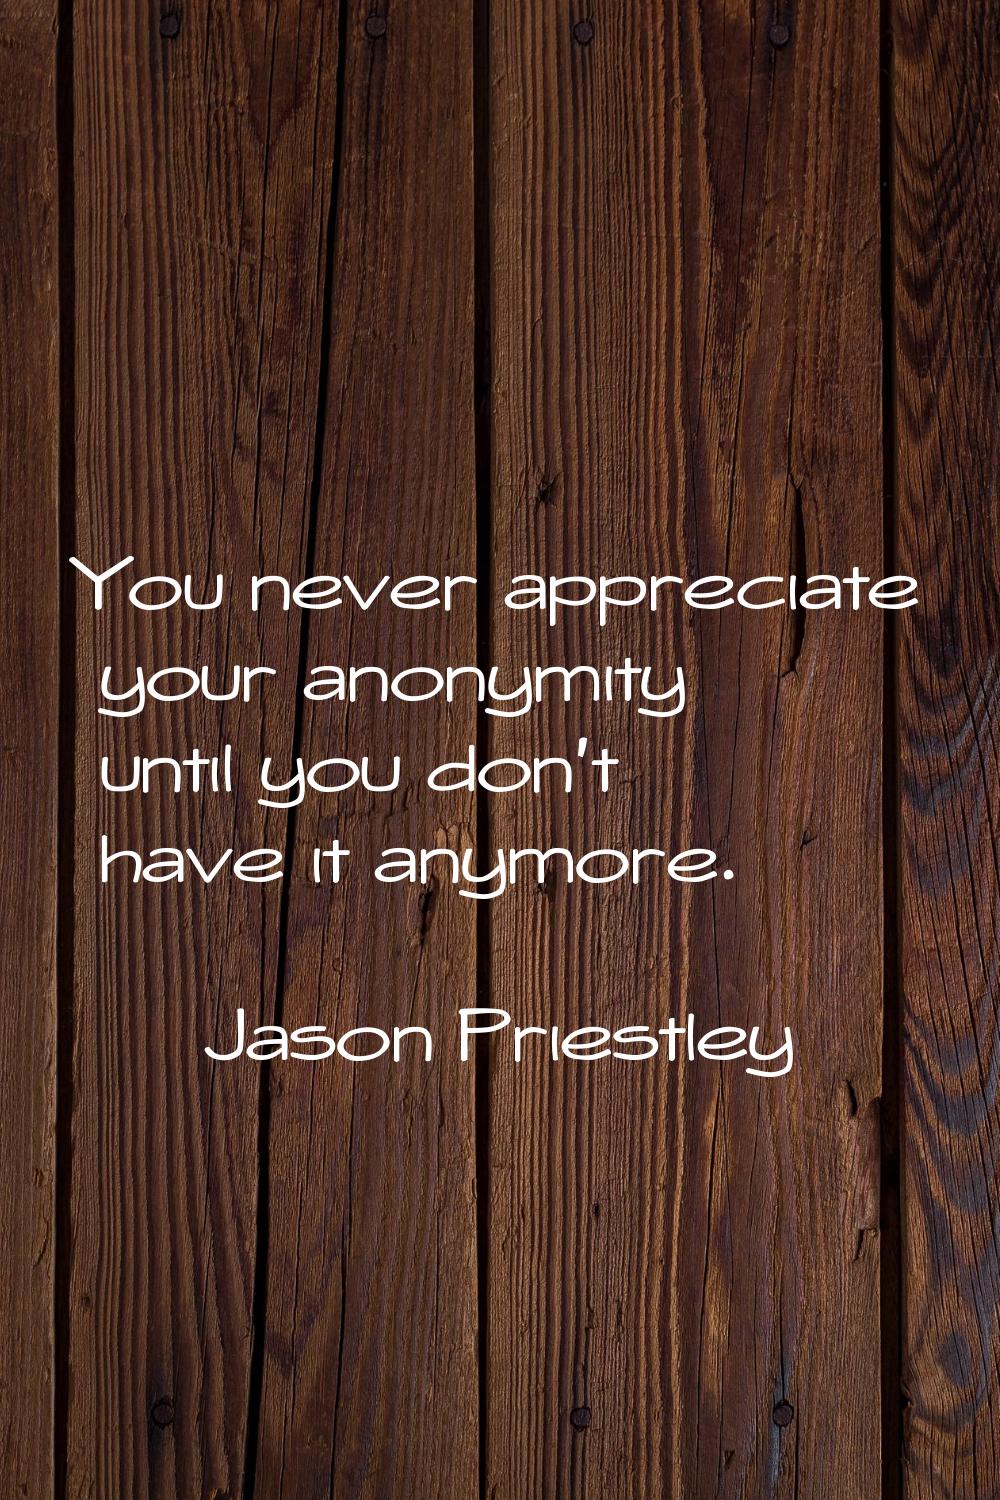 You never appreciate your anonymity until you don't have it anymore.